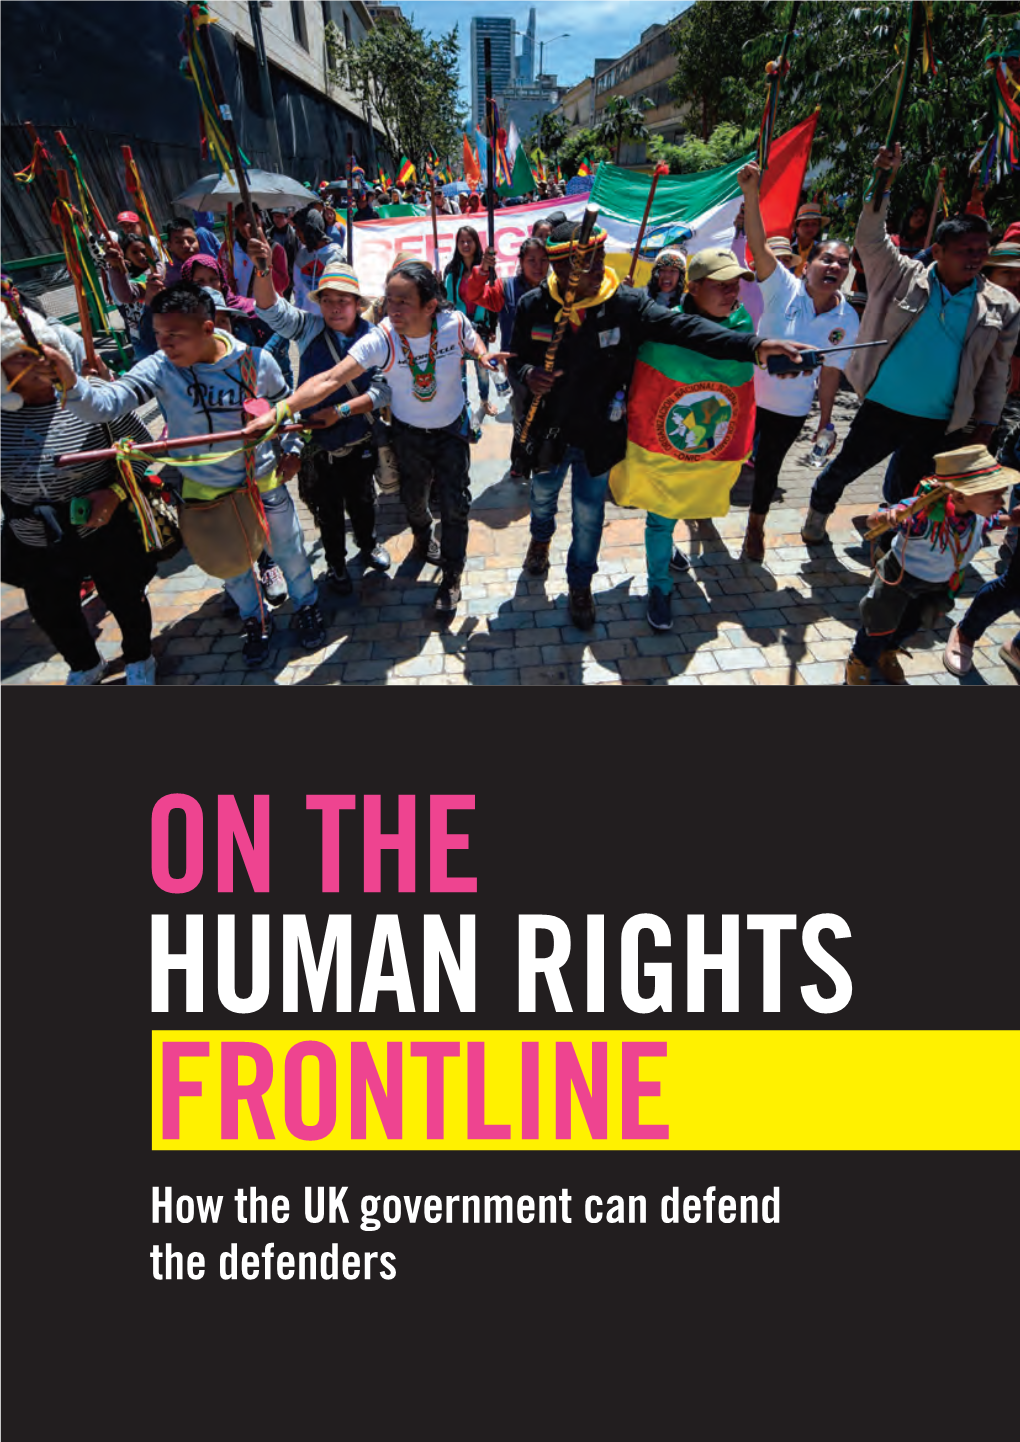 On the Human Rights Frontline